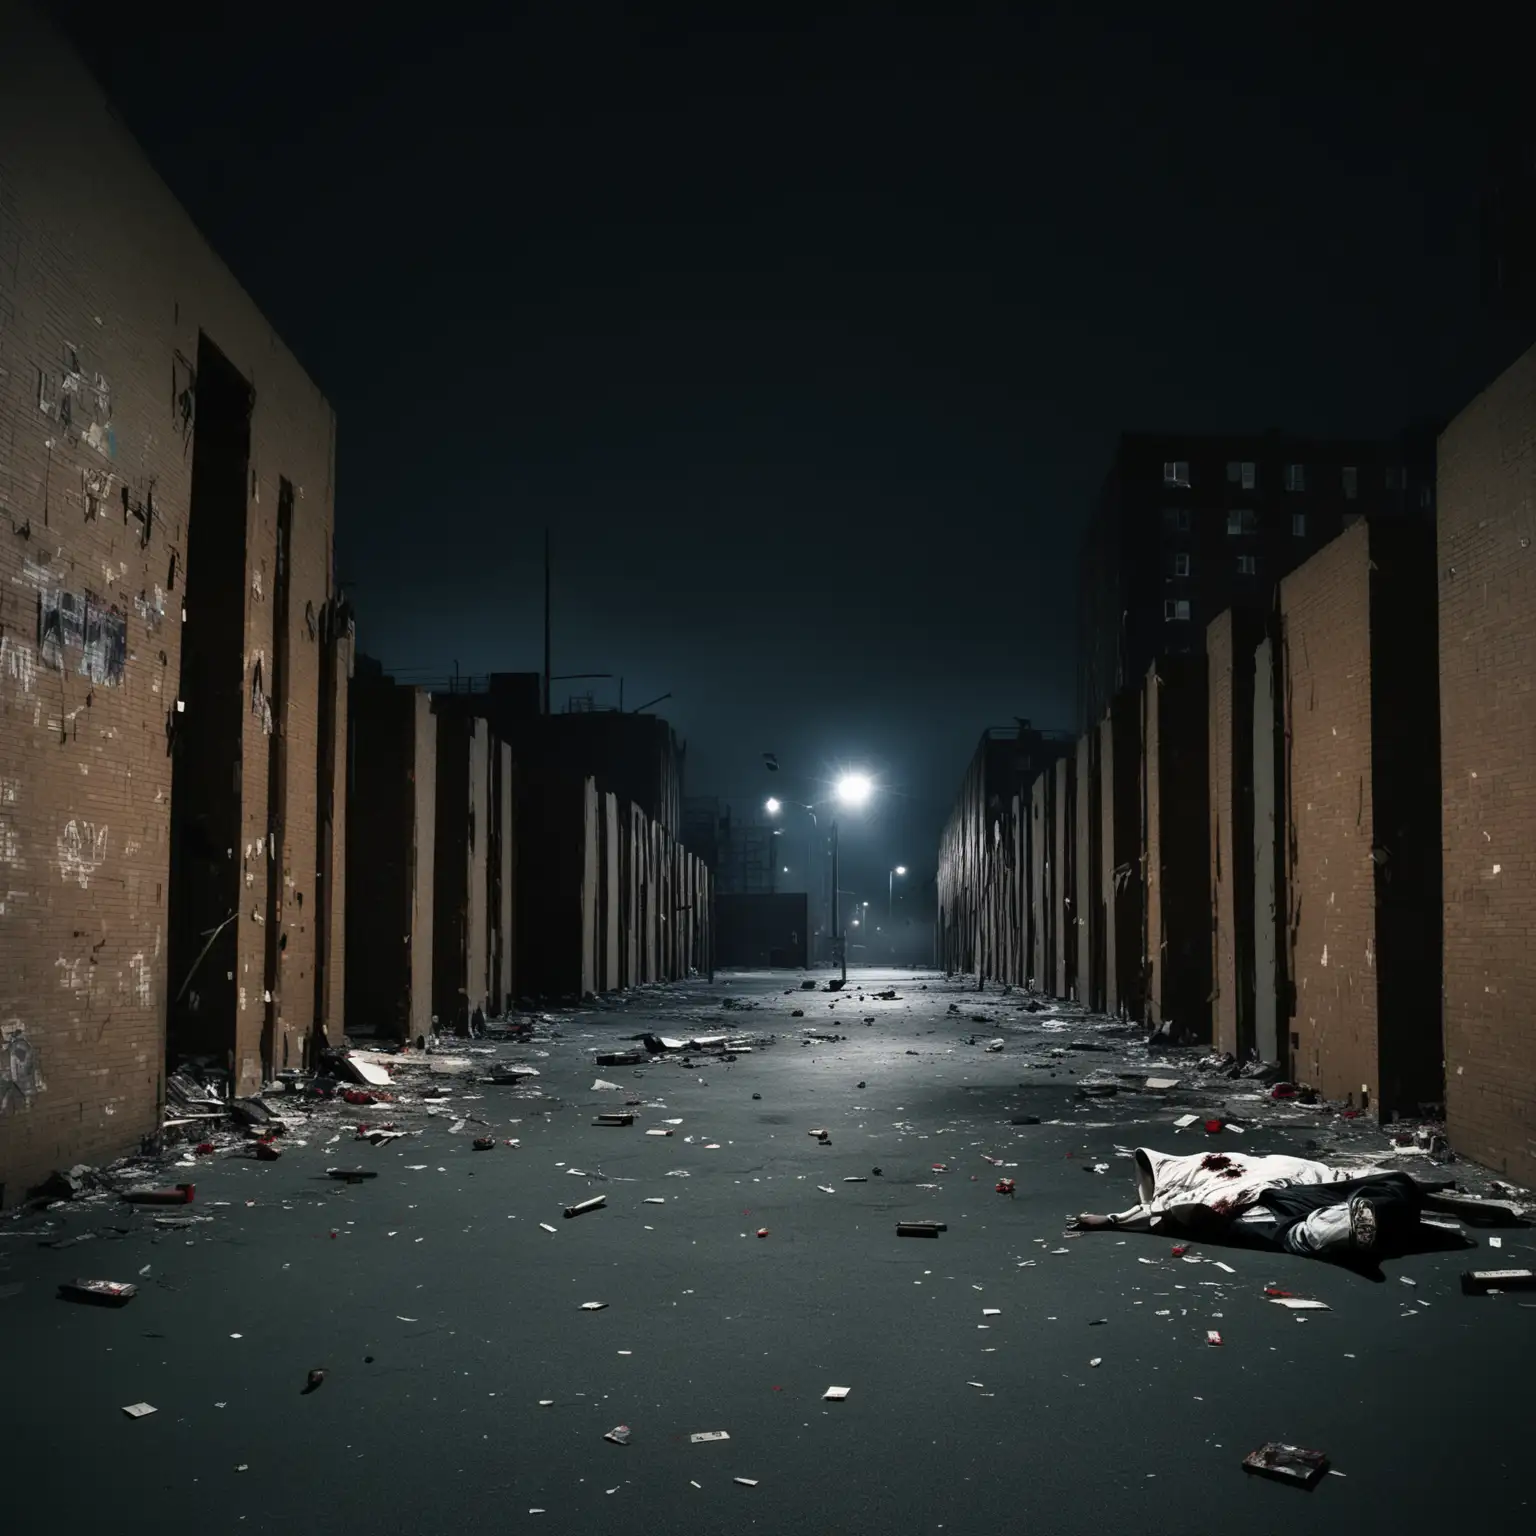 Urban Violence in Inner City Projects at Night